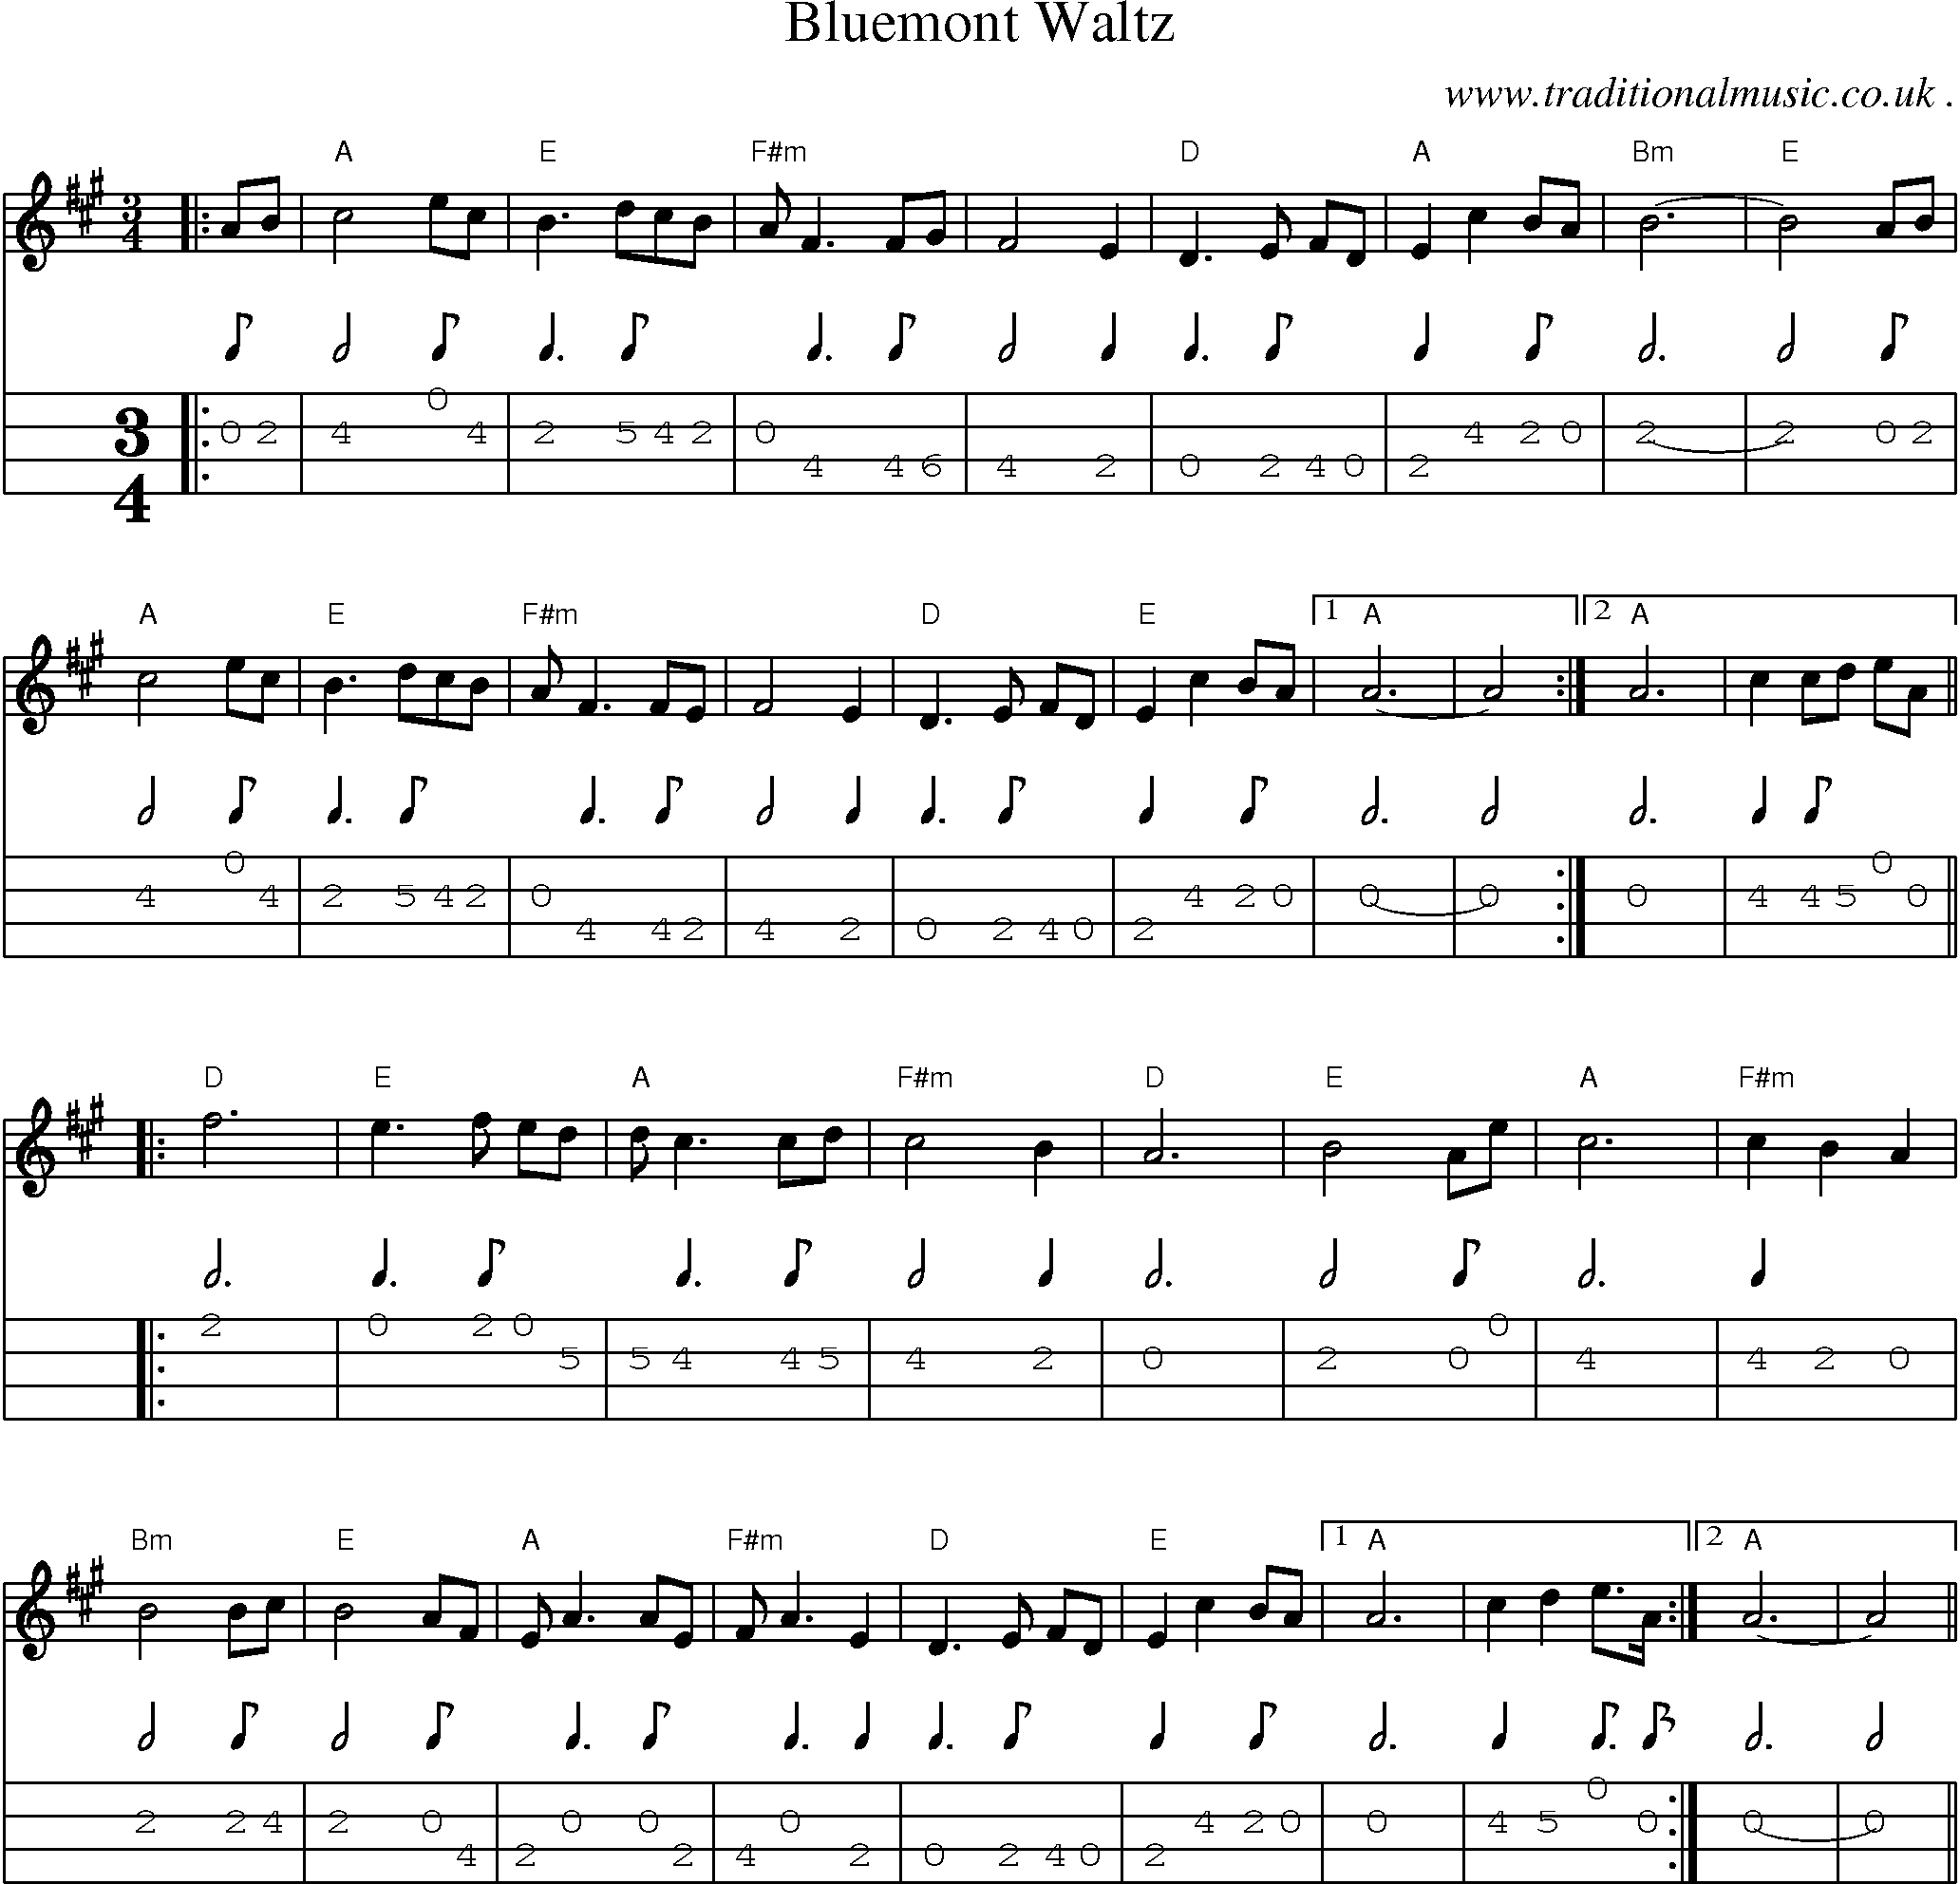 Music Score and Mandolin Tabs for Bluemont Waltz